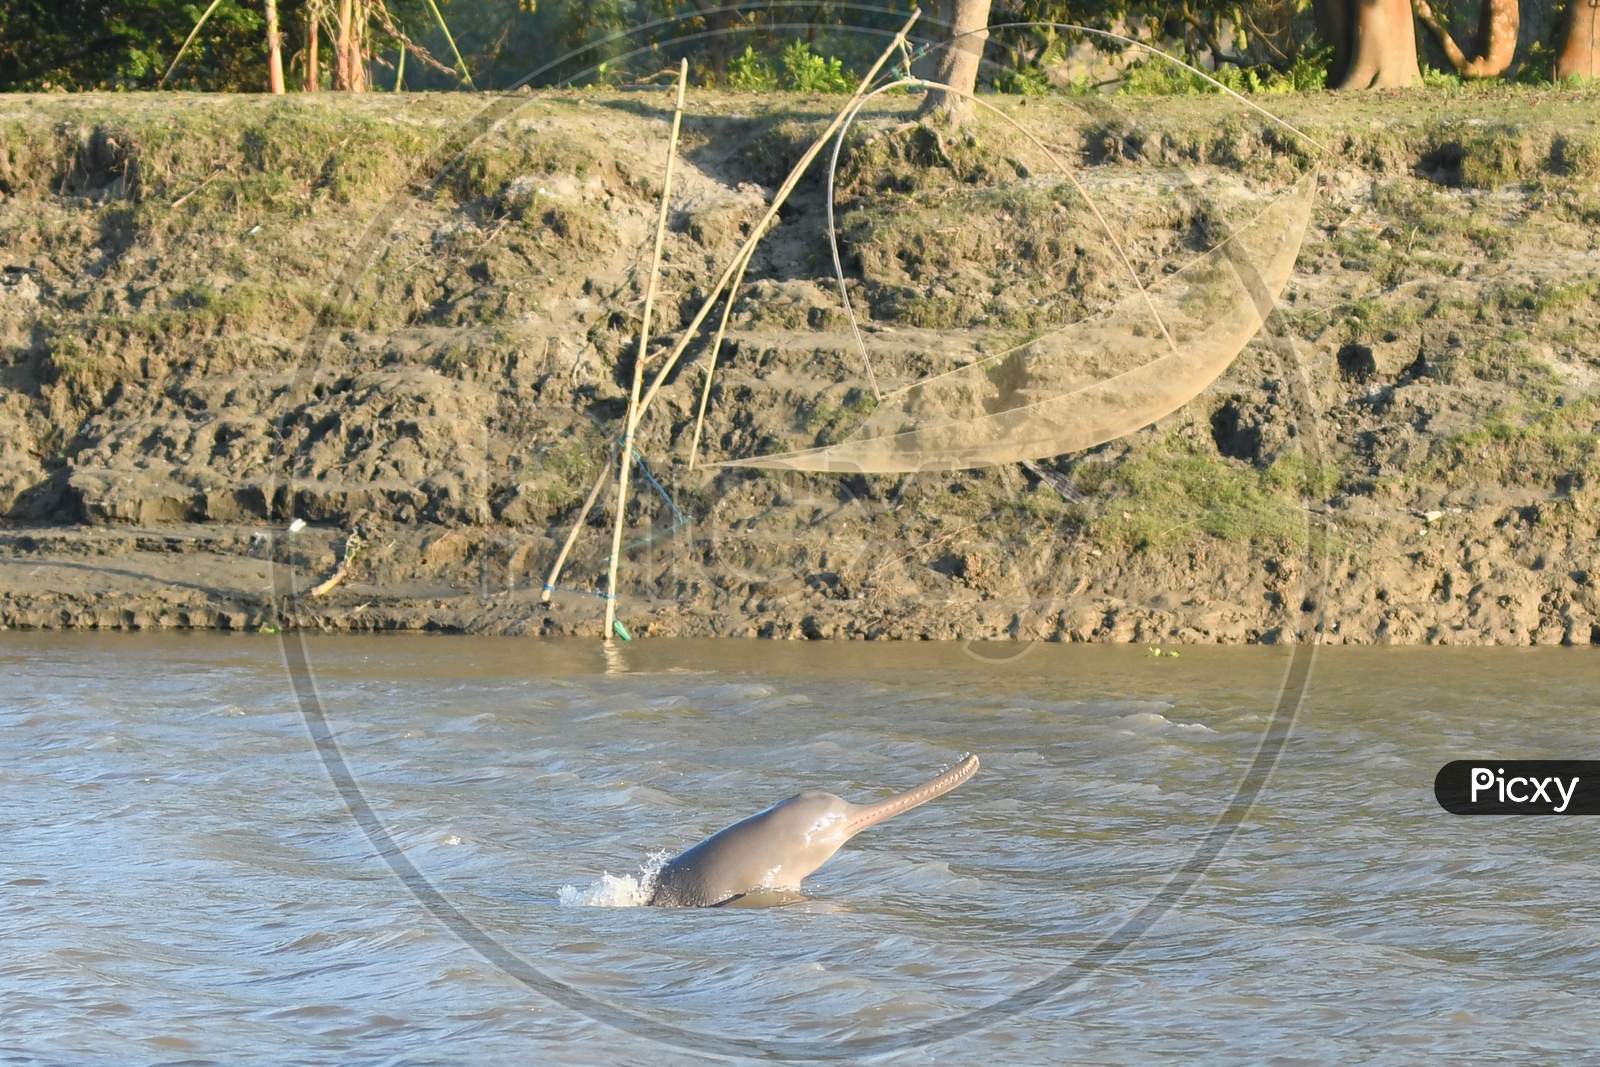 A  river dolphin surfaces in the Brahmaputra river at Kashokhila village in Morigaon district, some 50 kms from Guwahati, the capital city of India's northeastern state of Assam on Nov 8,2020.